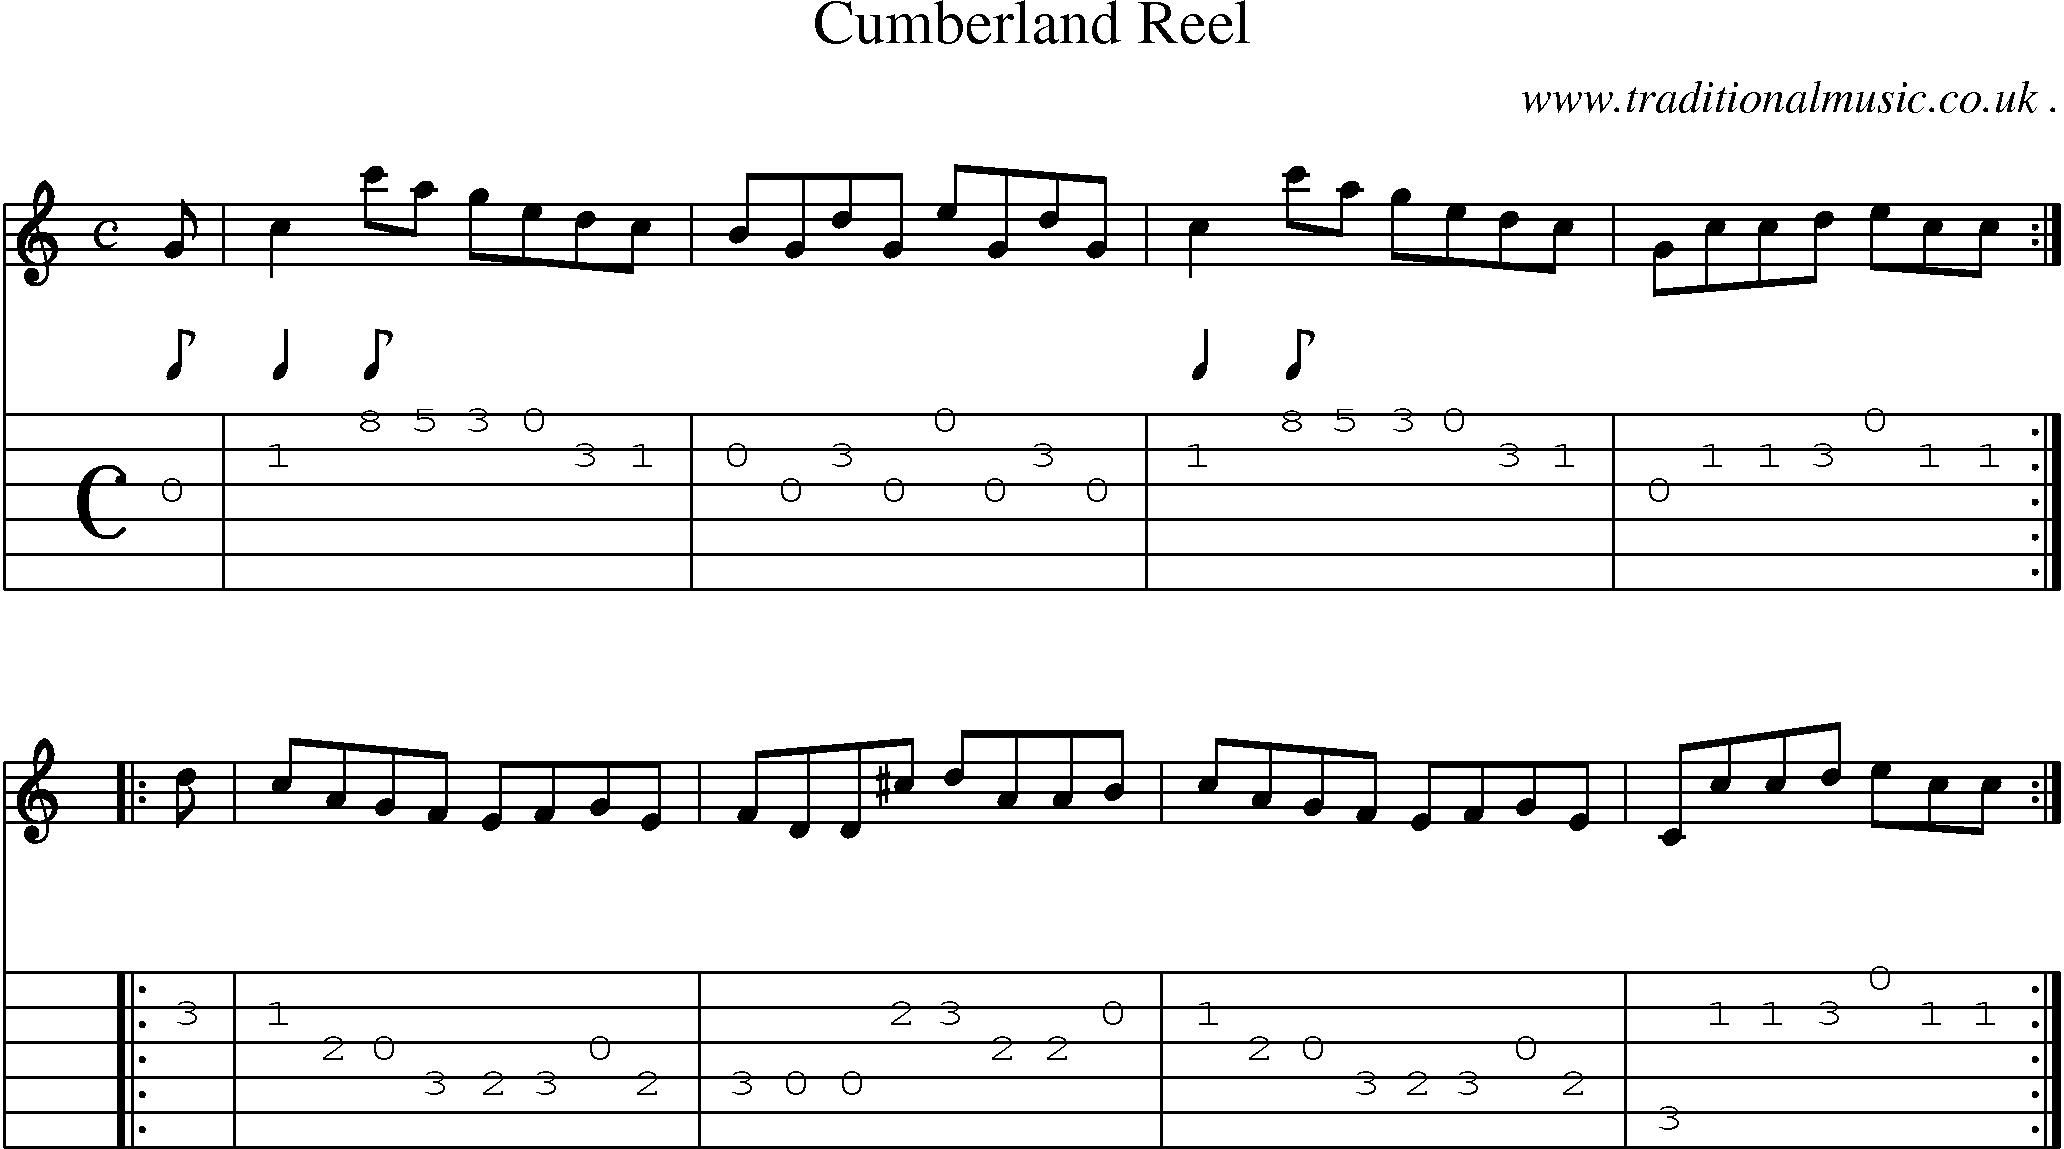 Sheet-Music and Guitar Tabs for Cumberland Reel